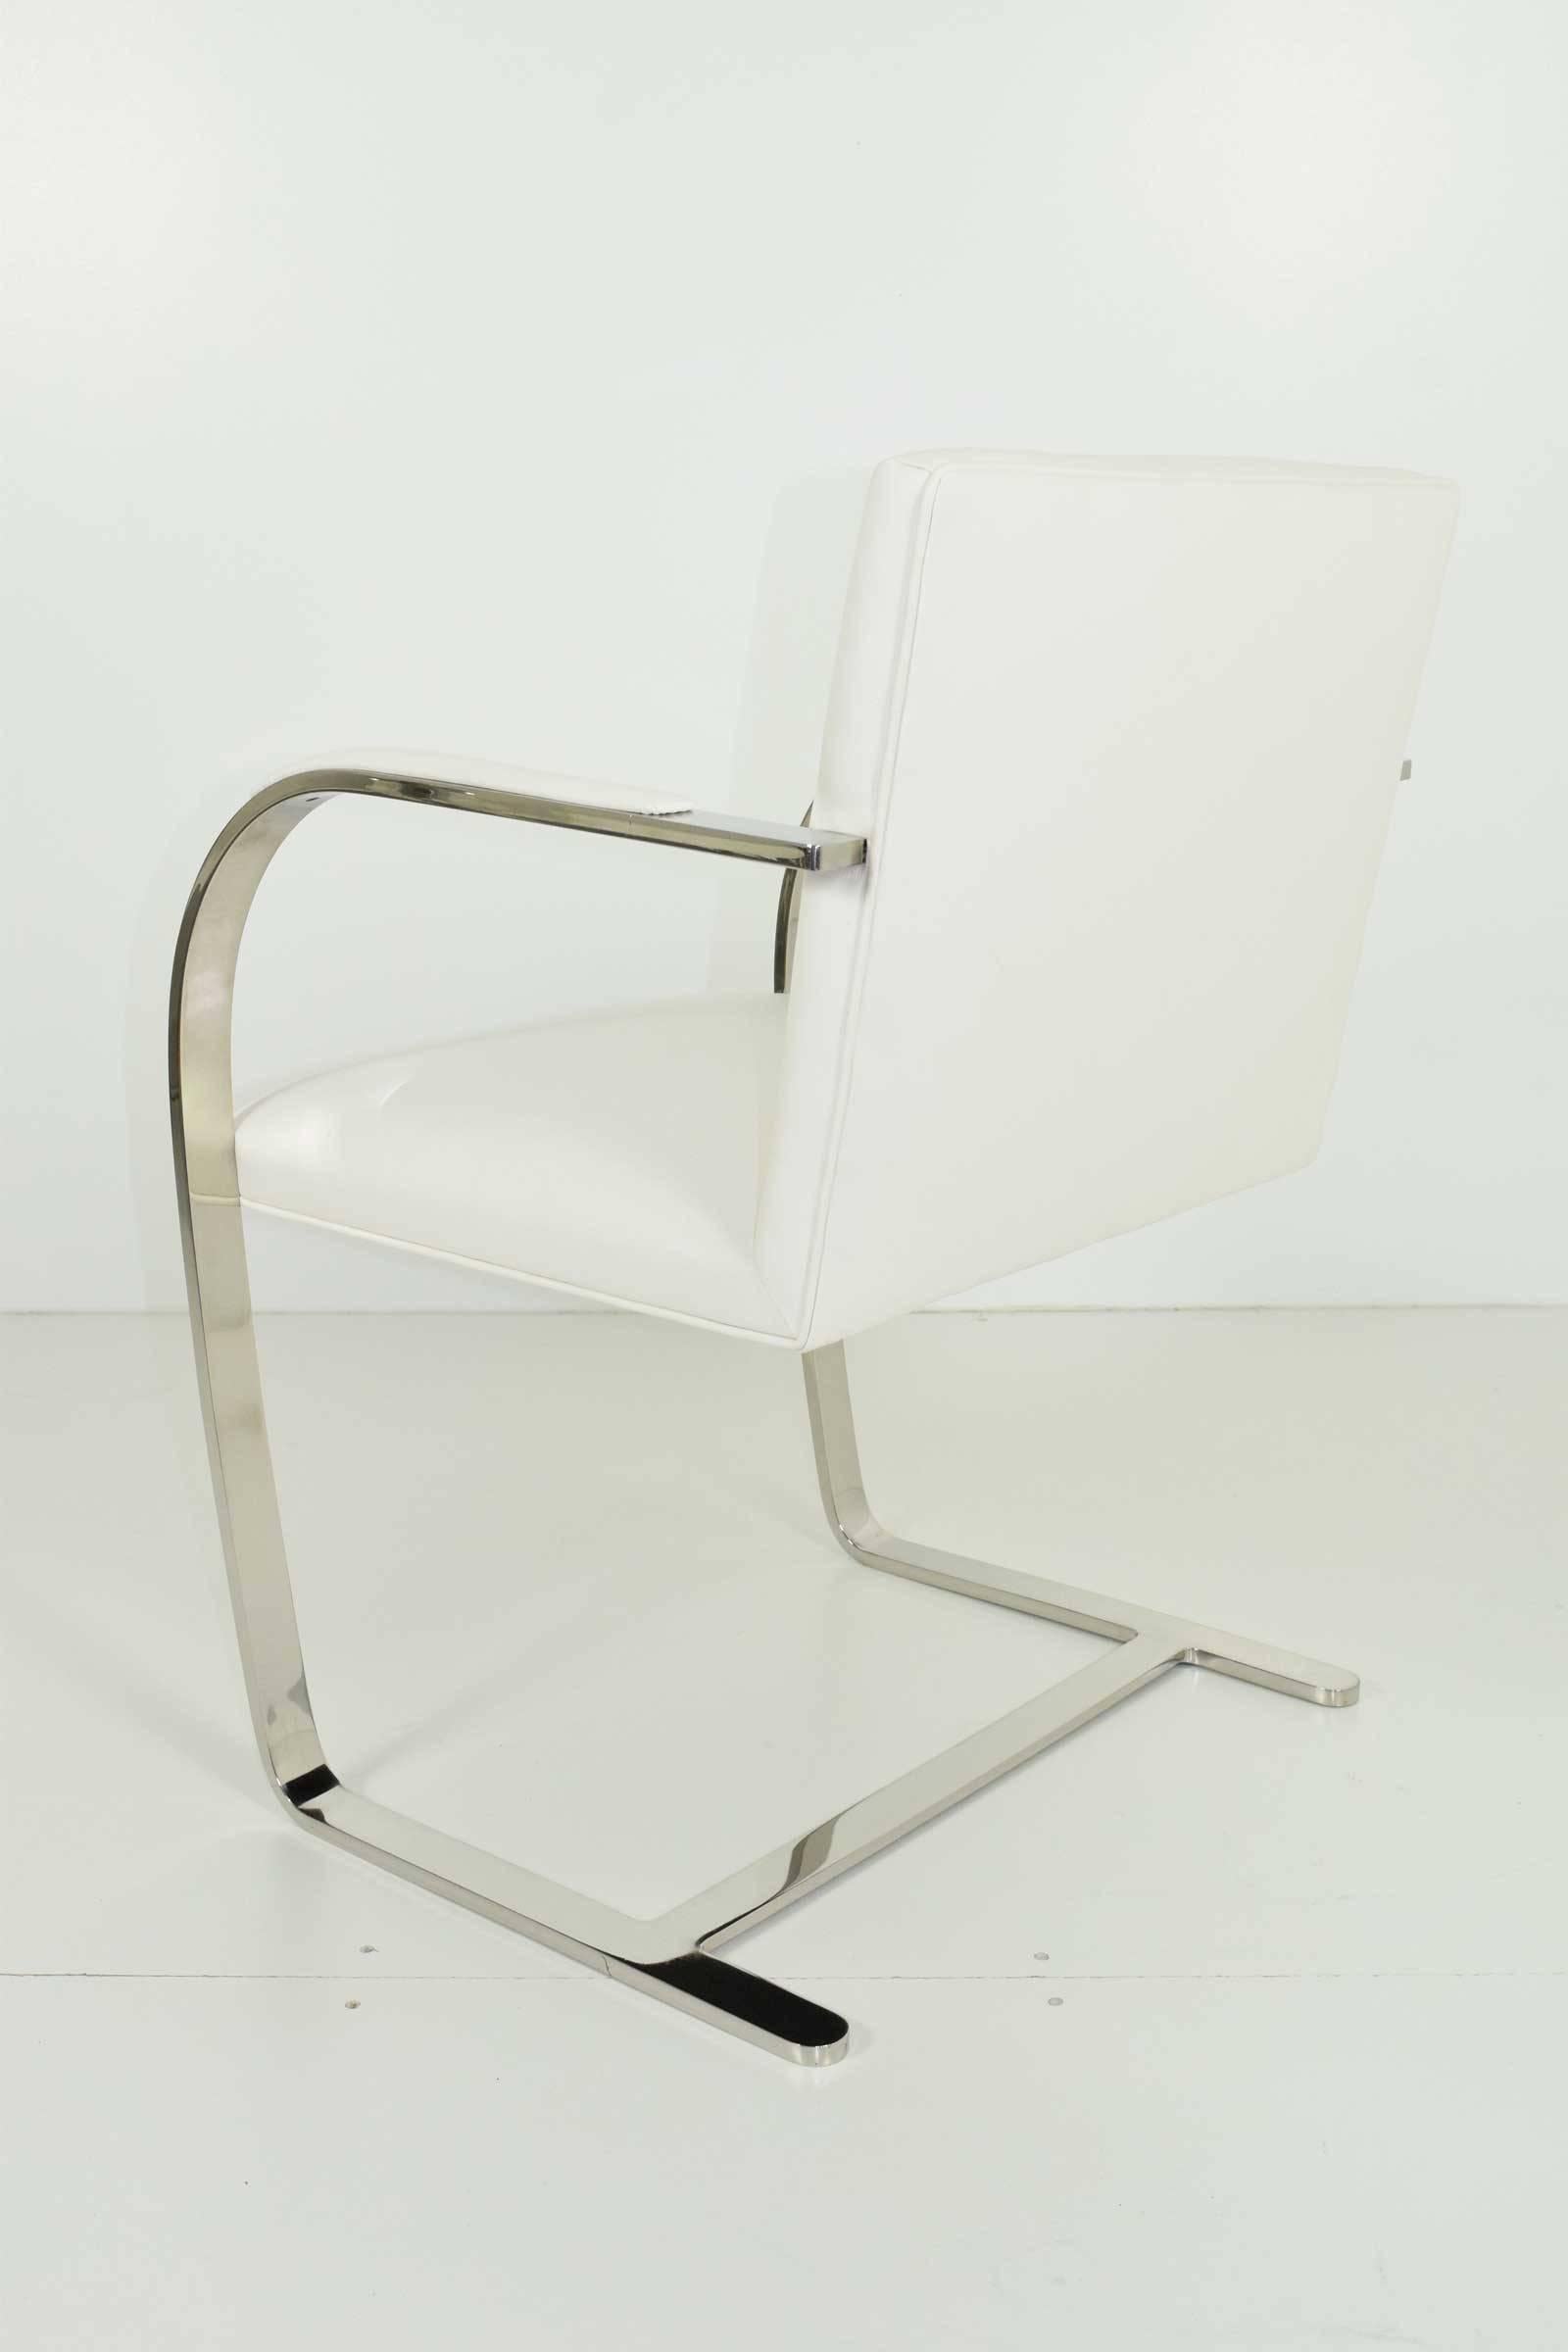 20th Century Set of Six Flatbar Brno Chairs by Knoll in New White Leather Upholstery